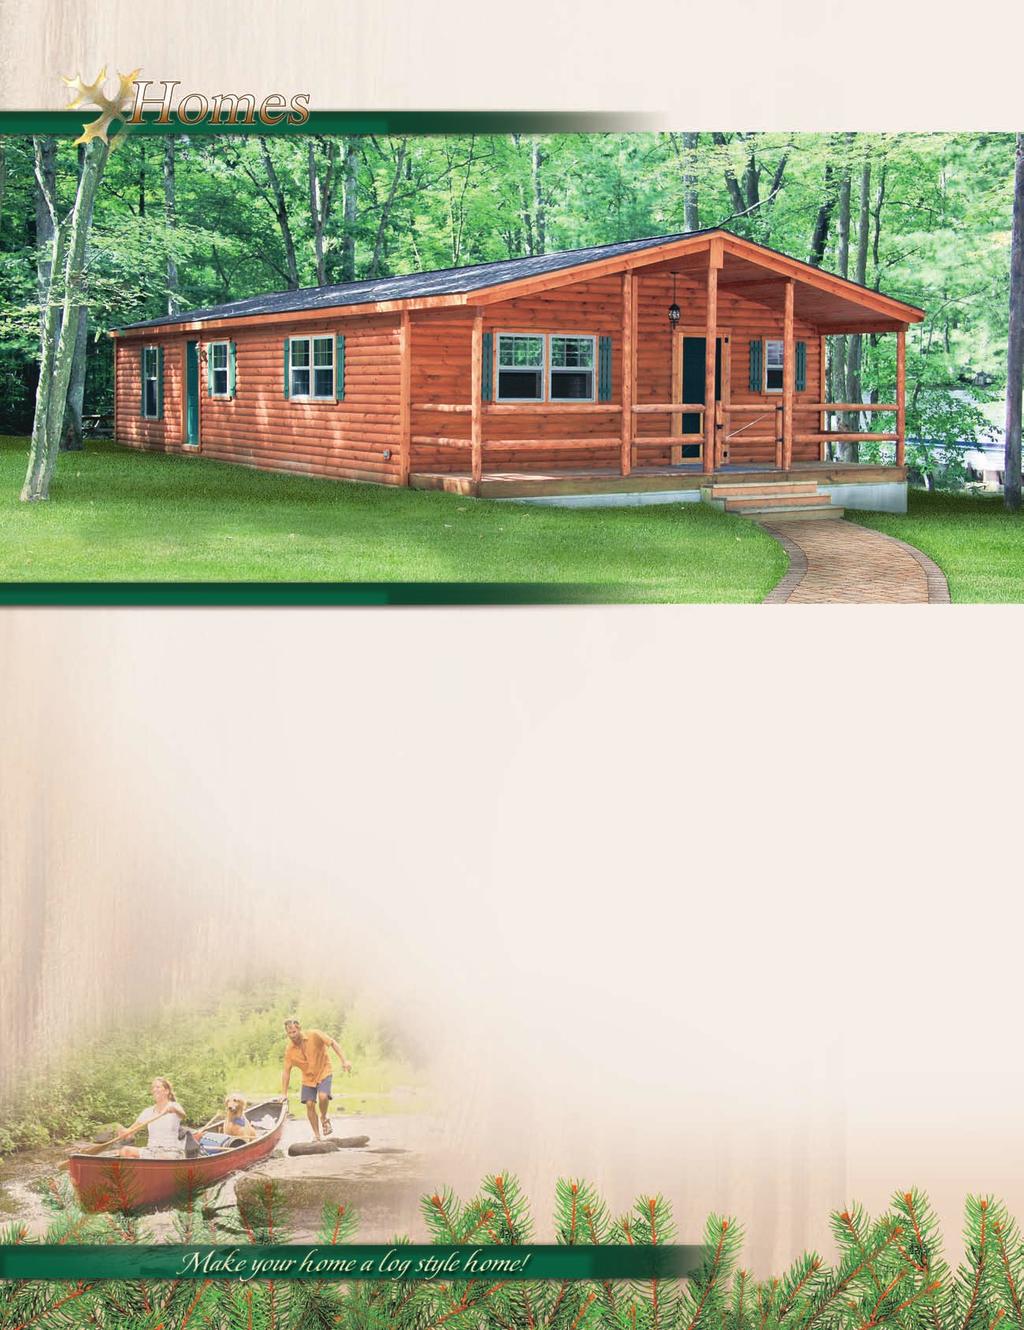 Our cabins also make great homes. We offer customized floor plans and kitchens, and the option of setting them on full basements. We can build to suit.